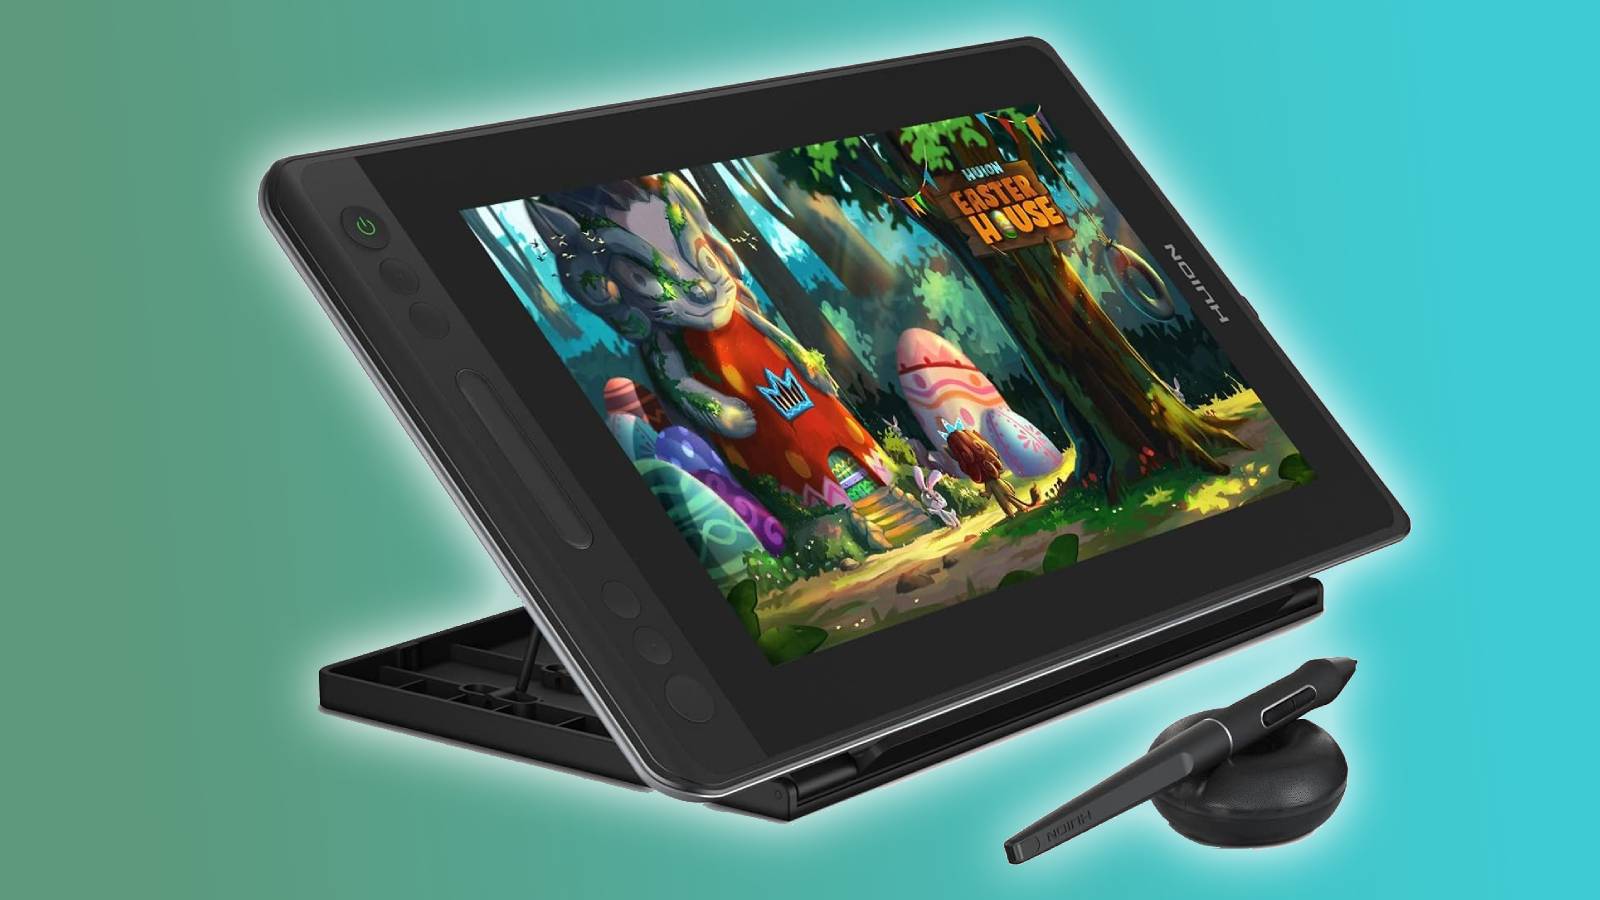 The Best Tablets for Drawing Reviews 2022: Wacom, X-Pen, Apple, Samsung